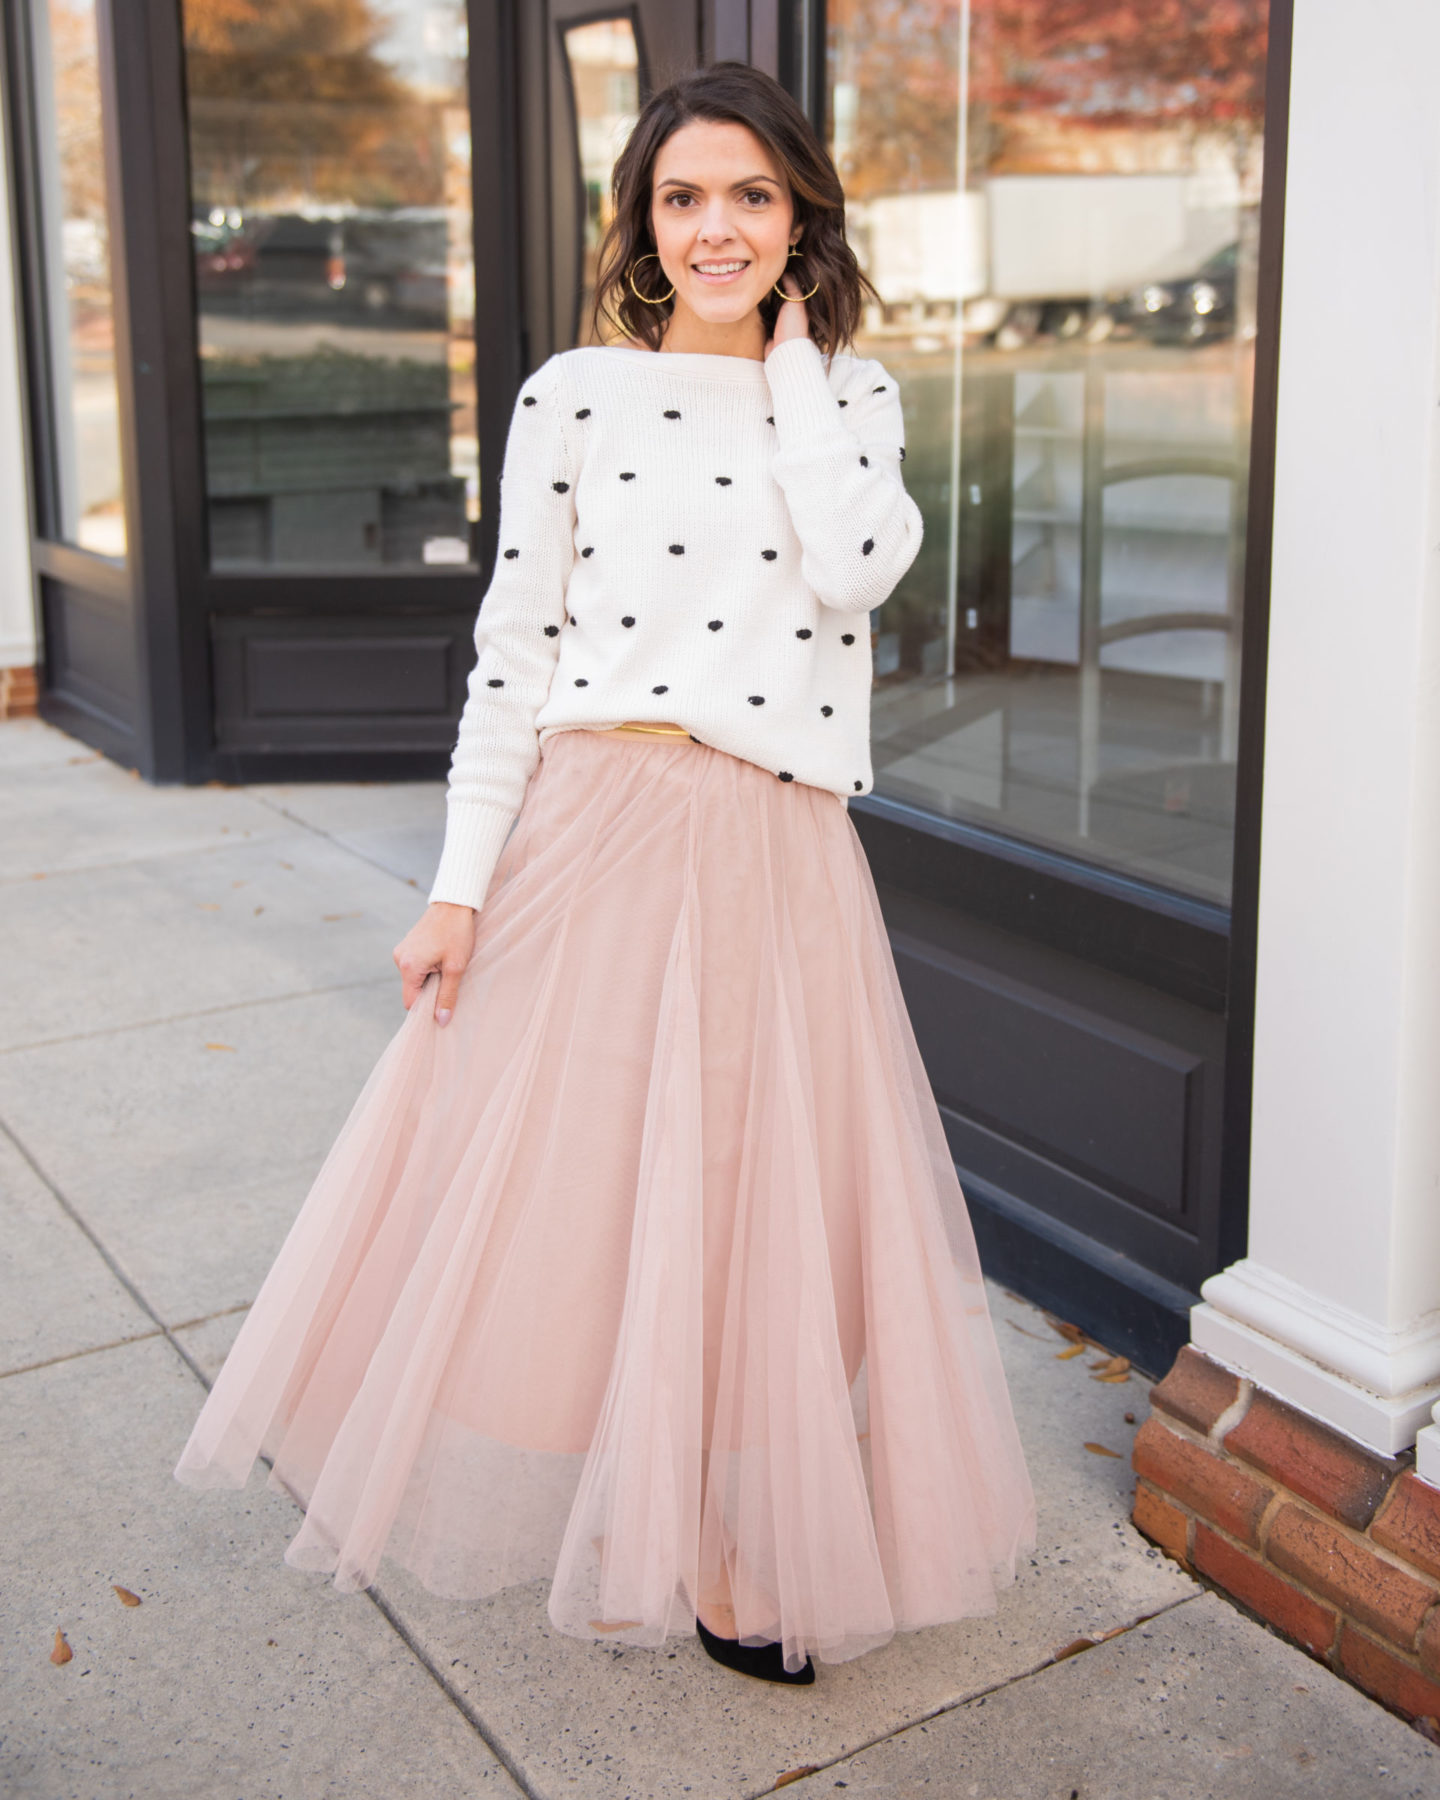 3 Ways To Style A Tulle Skirt The Sarah Stories 0609